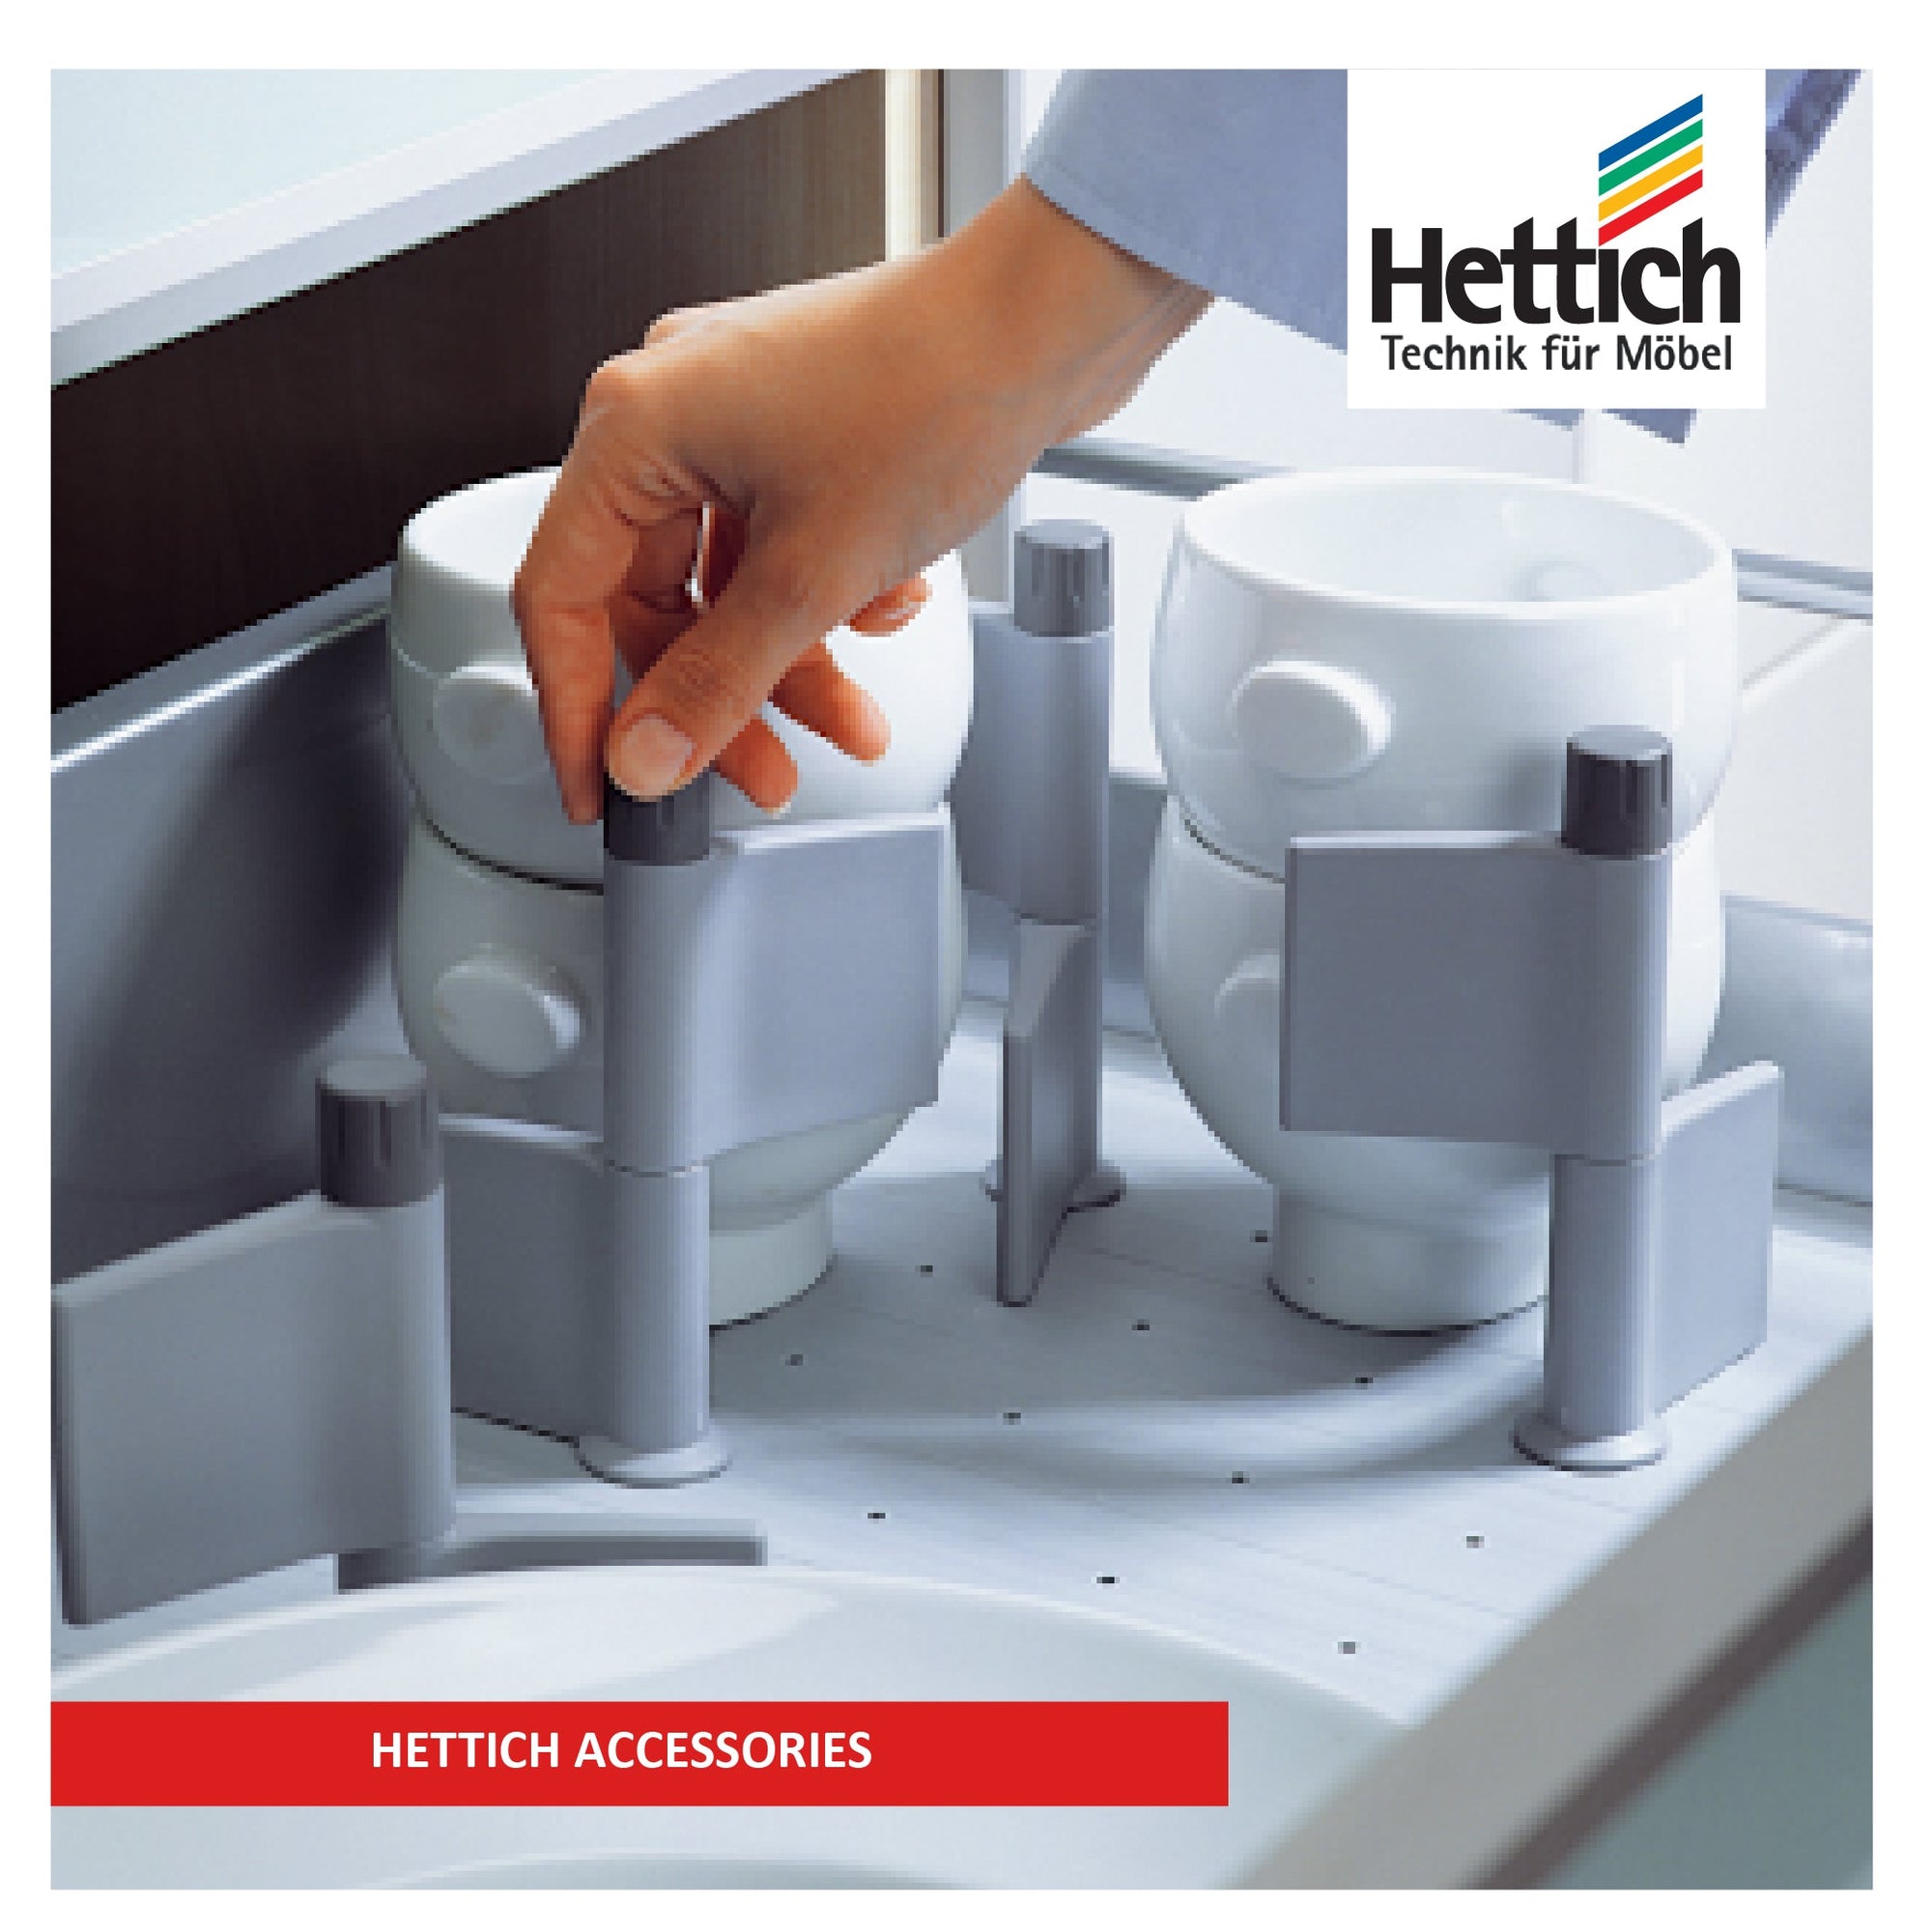 Hettich Accessories - Stylish and Functional Furniture Enhancements